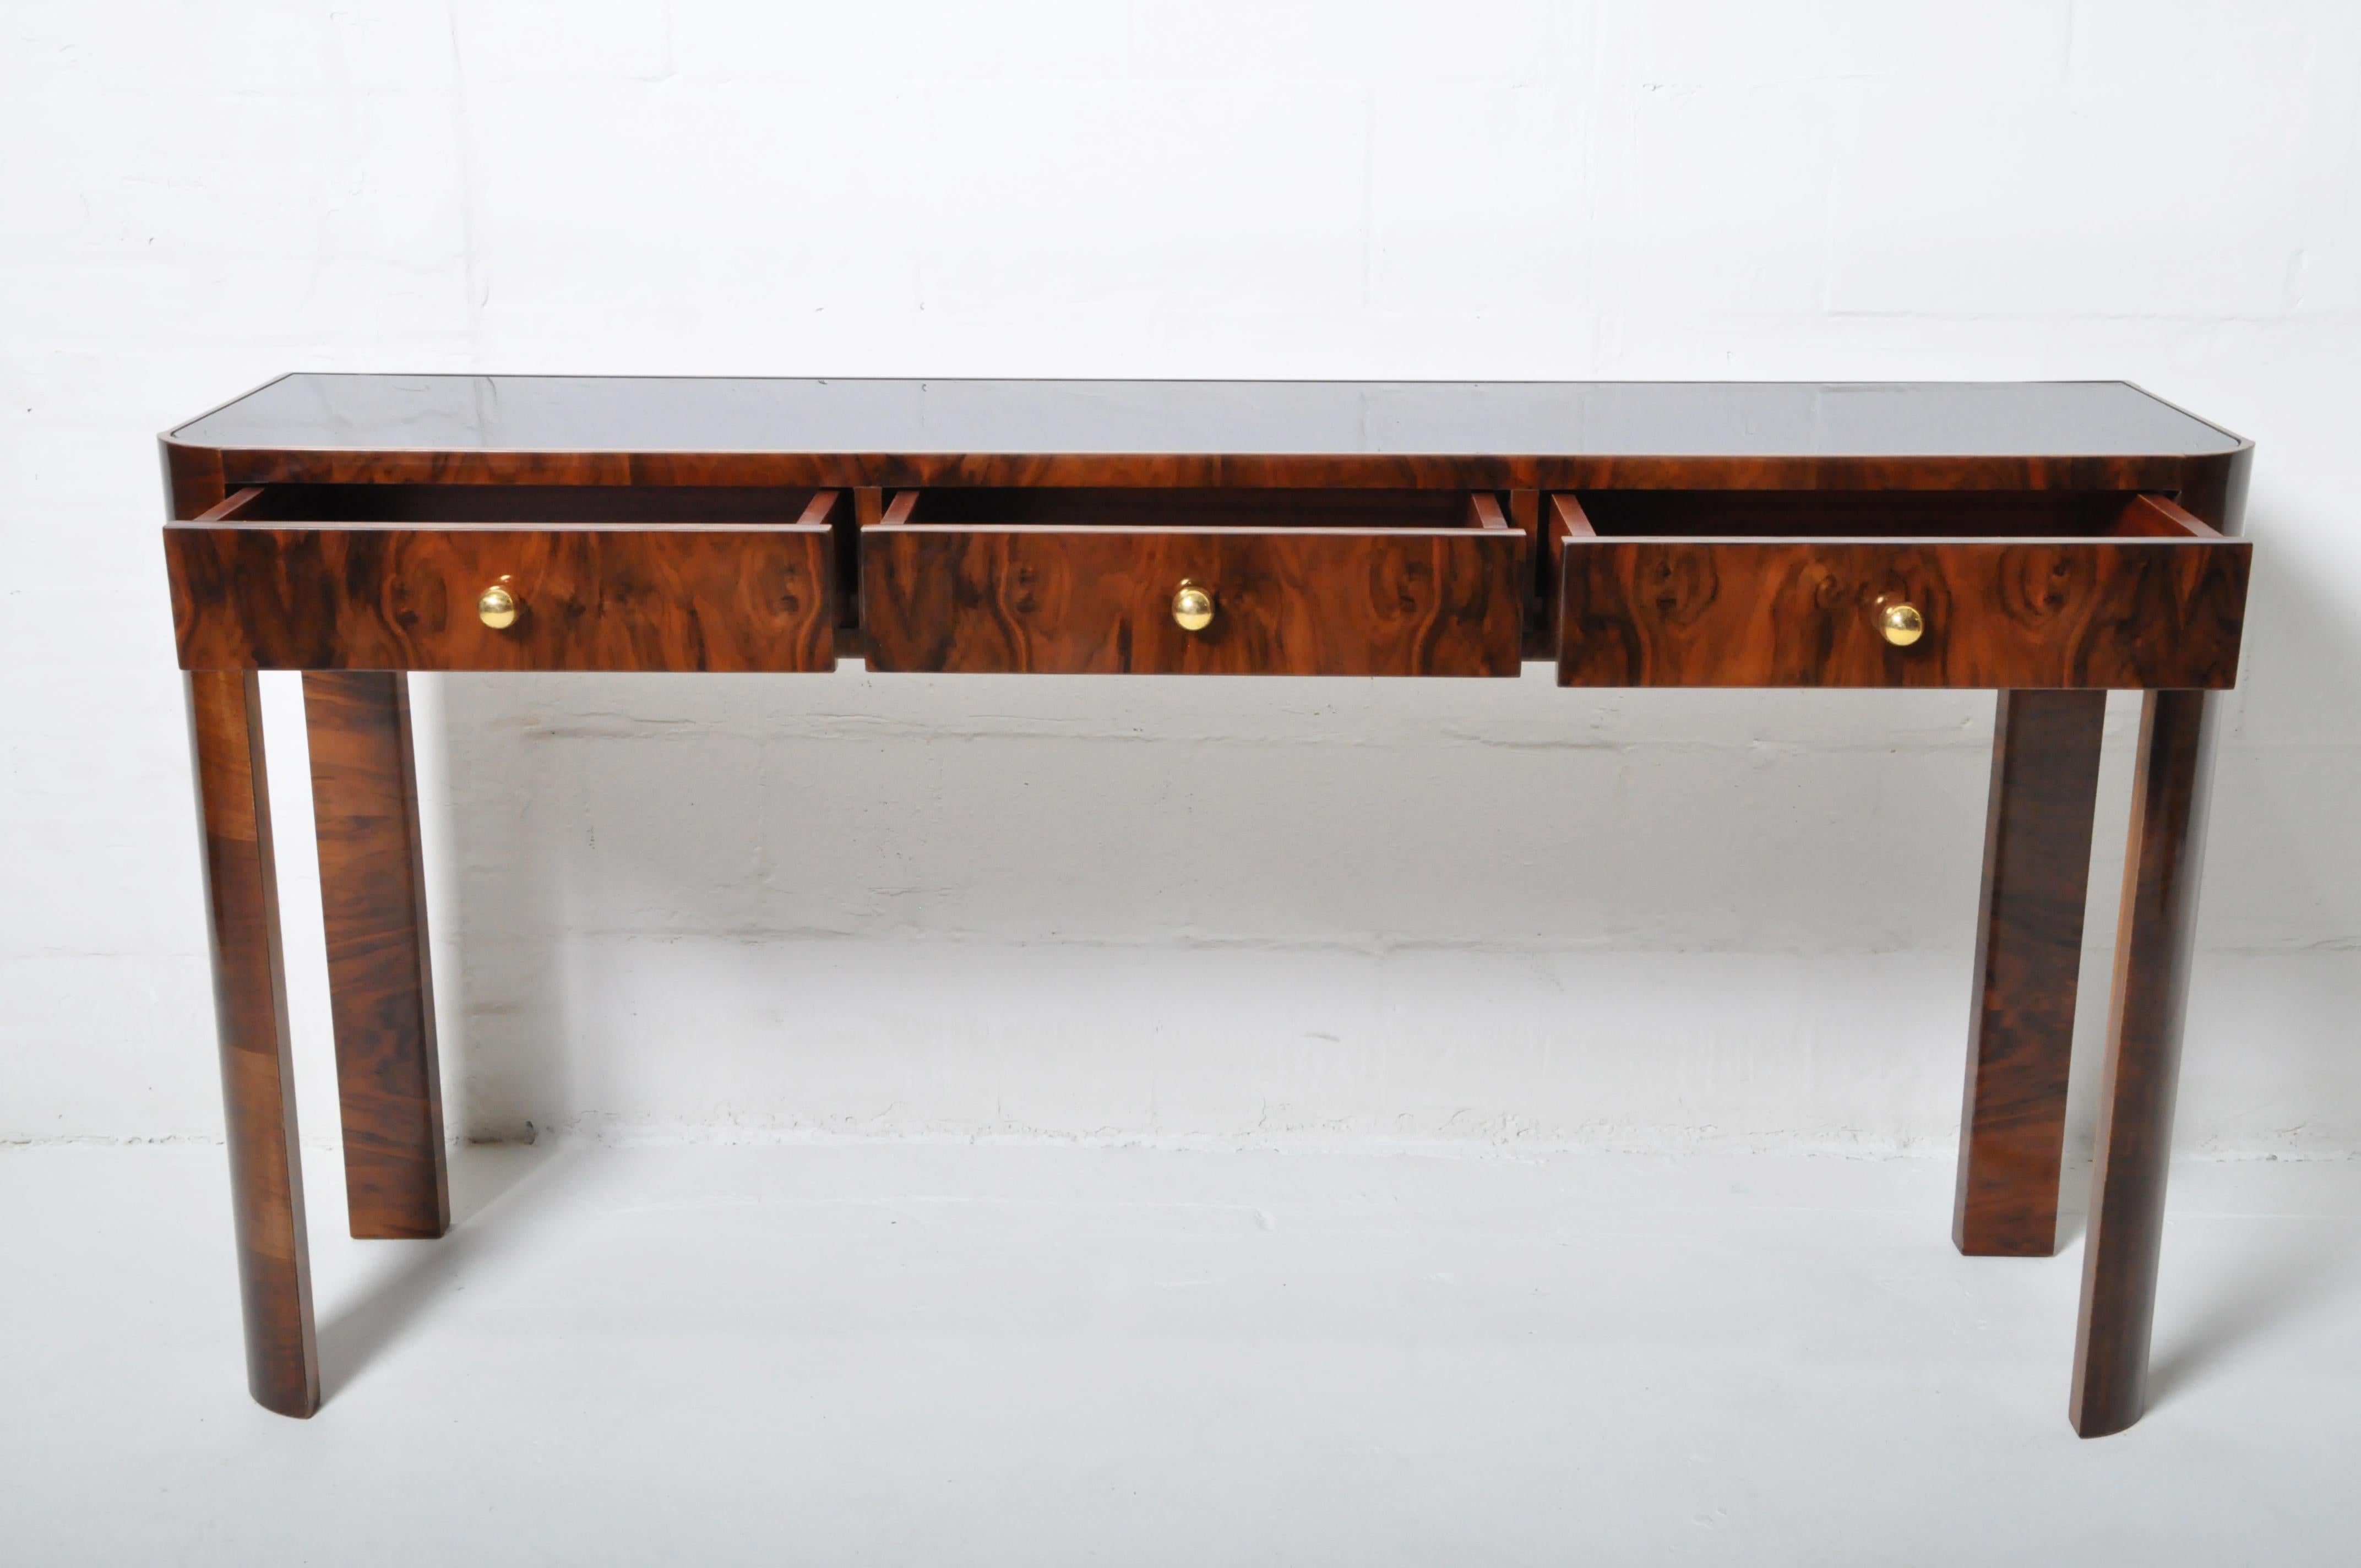 Contemporary Console Table with Three Drawers and a Black Glass Top